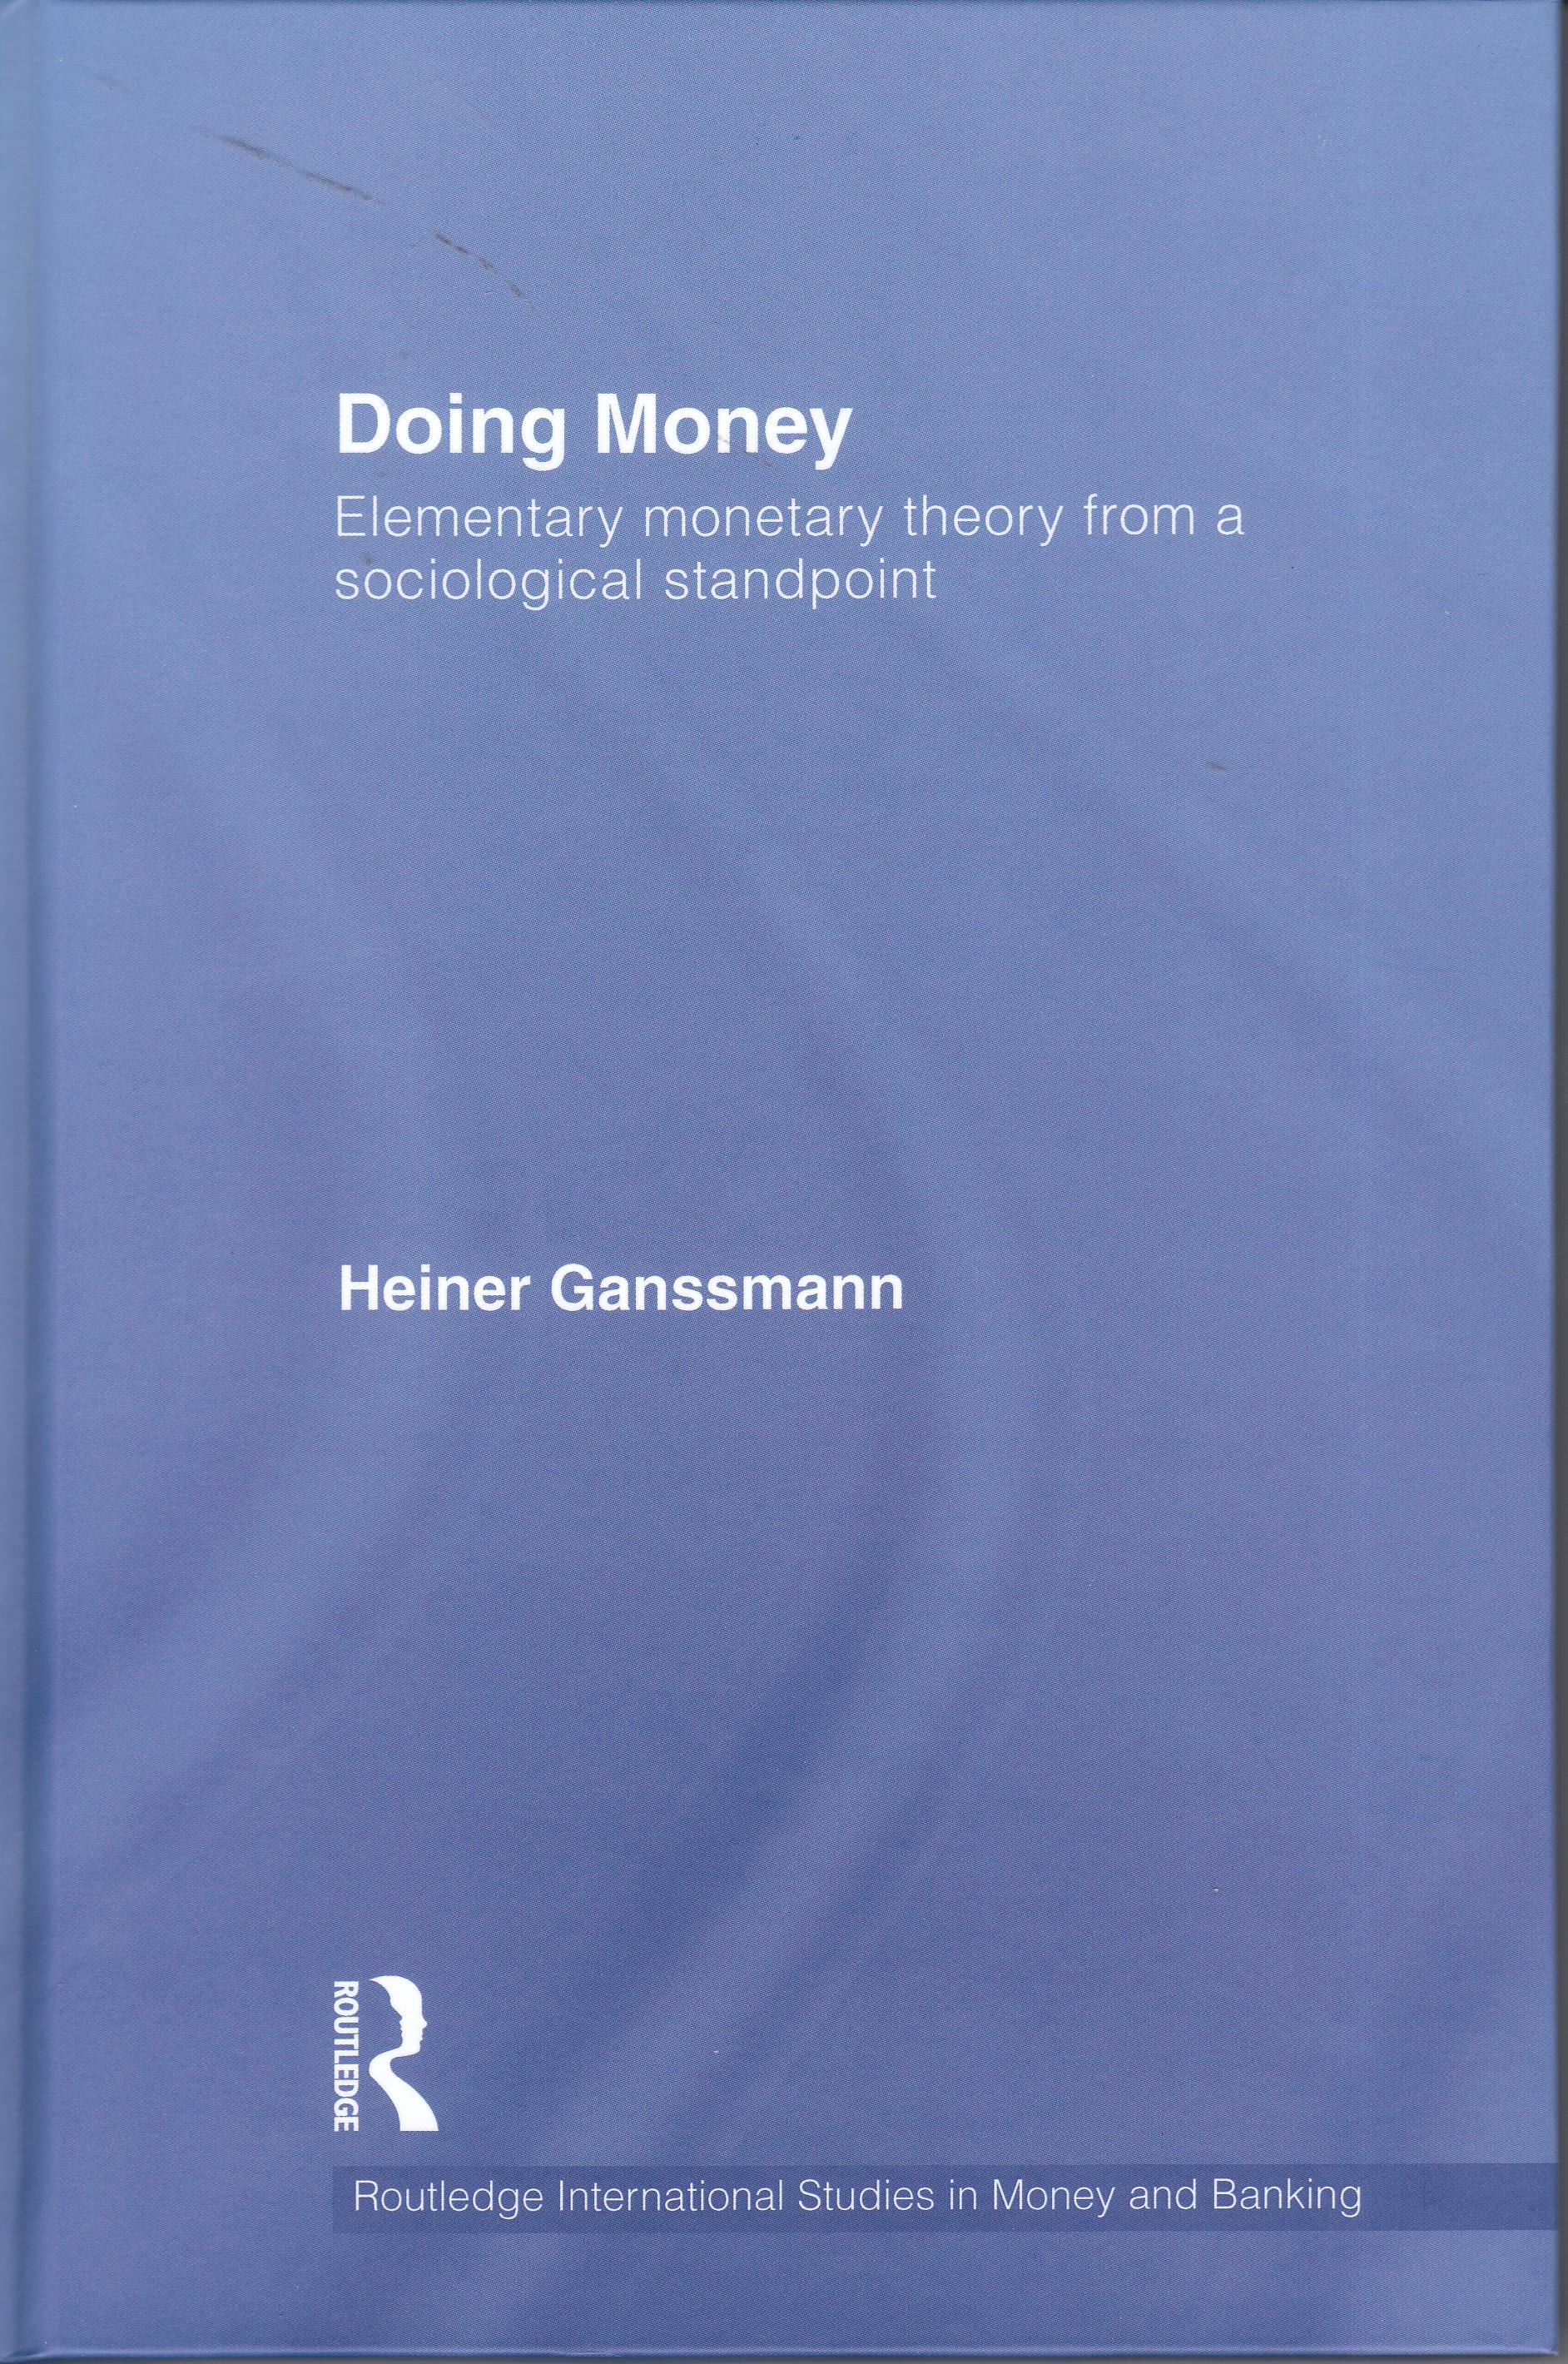 Doing Money "Elementary Monetary Theory from a Sociological Standpoint"